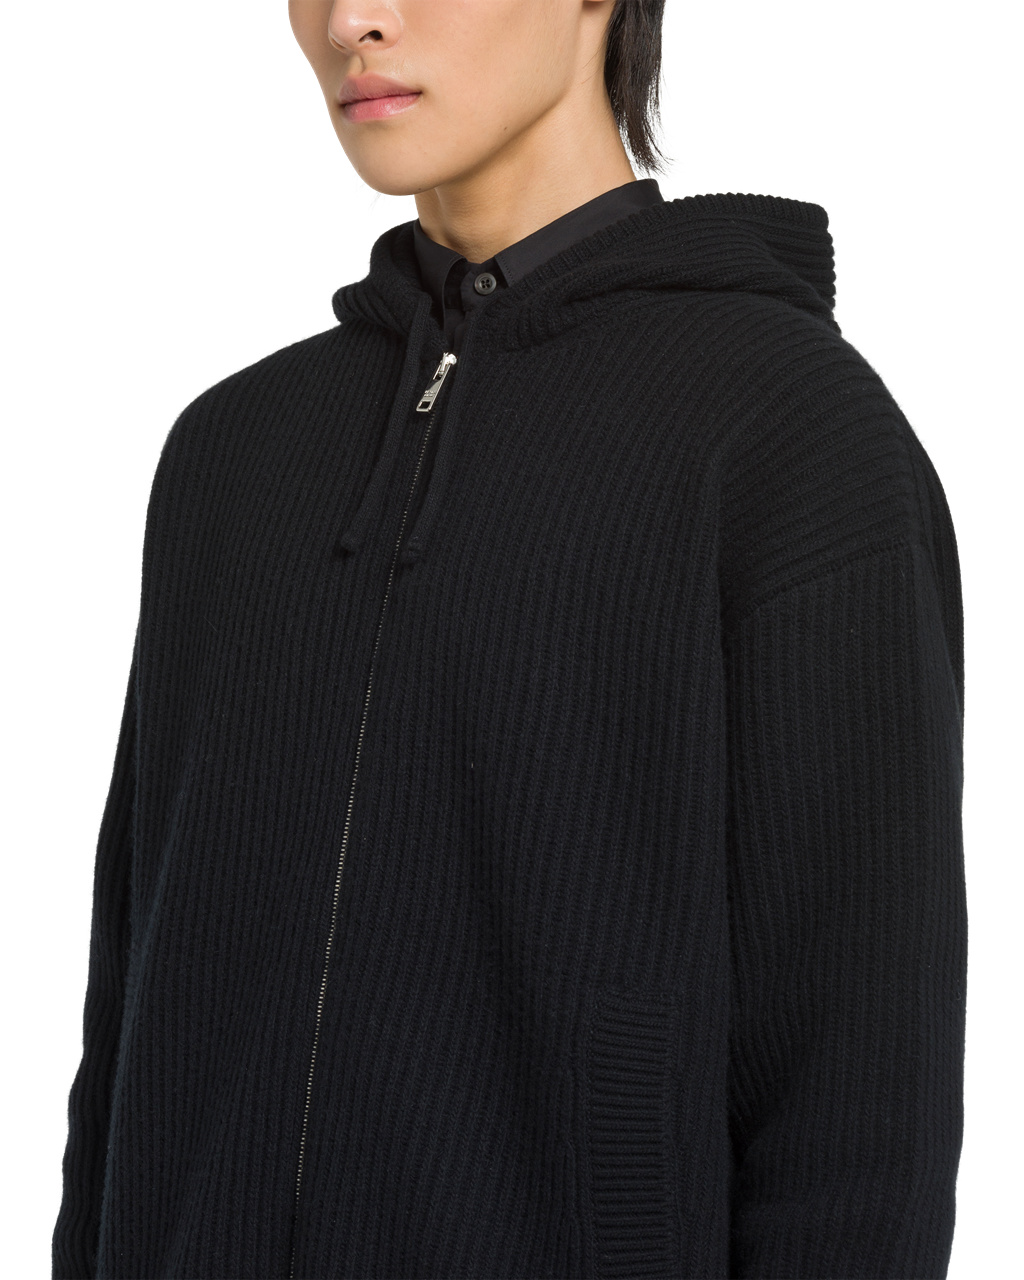 New Prada Hoodie Outlet Shop - Wool And Cashmere Knit Hoodie Mens Black